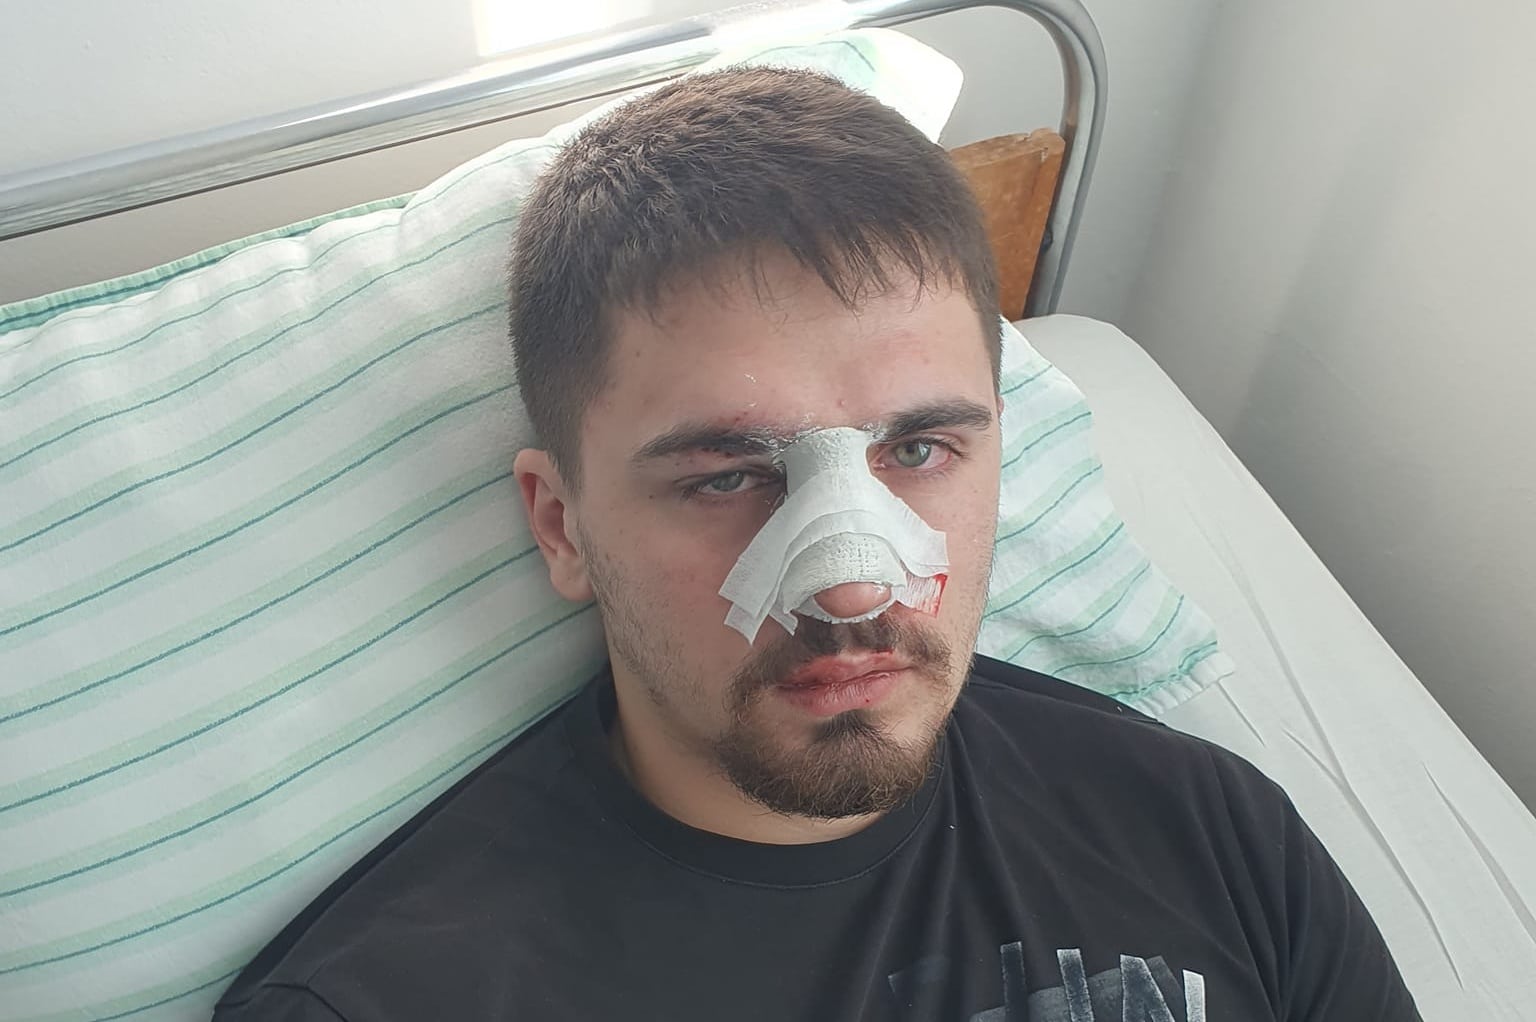 A man from Pleven claims that his son was beaten